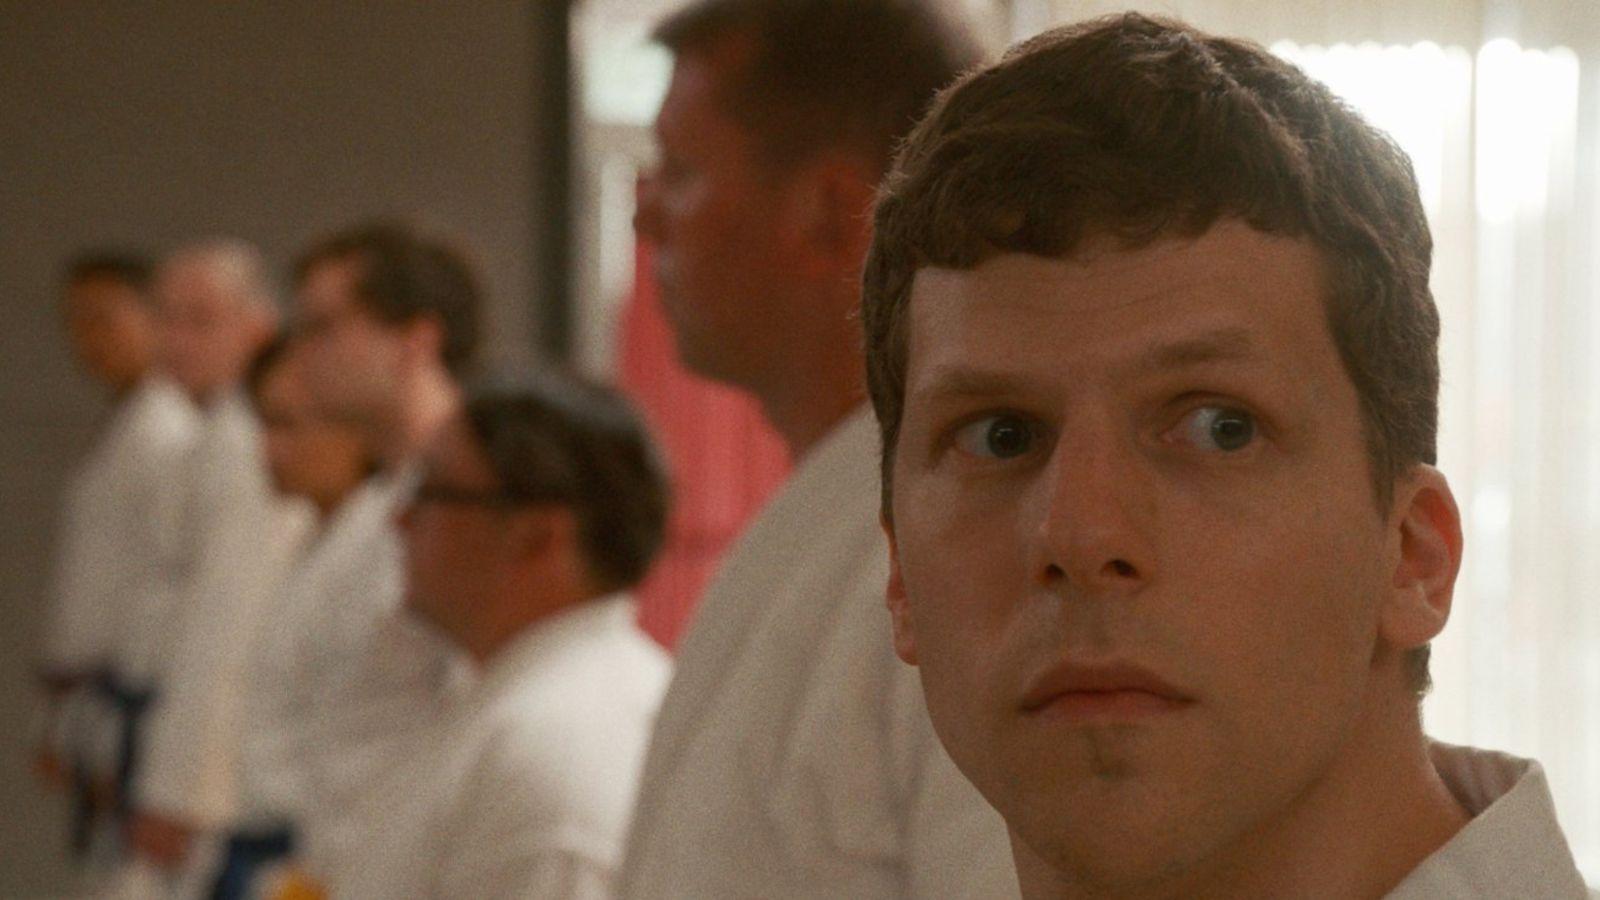 Jesse Eisenberg Learns The Art Of Self Defense In An Arch, Funny